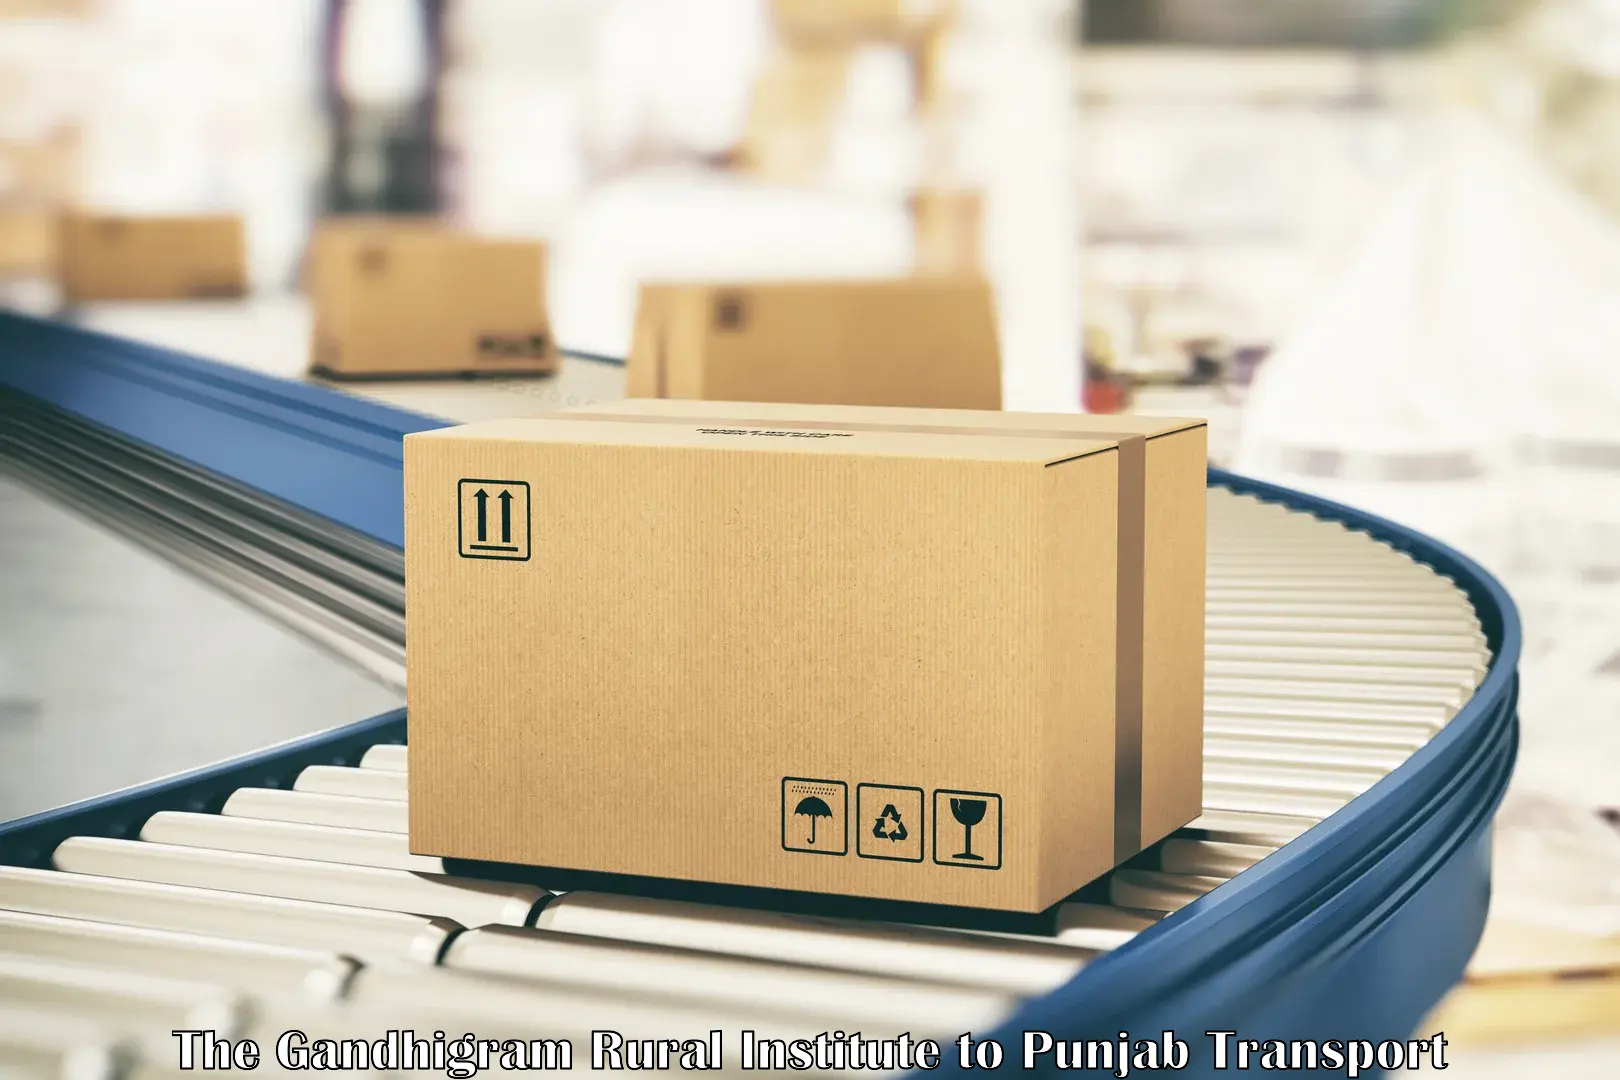 Domestic goods transportation services The Gandhigram Rural Institute to Pathankot